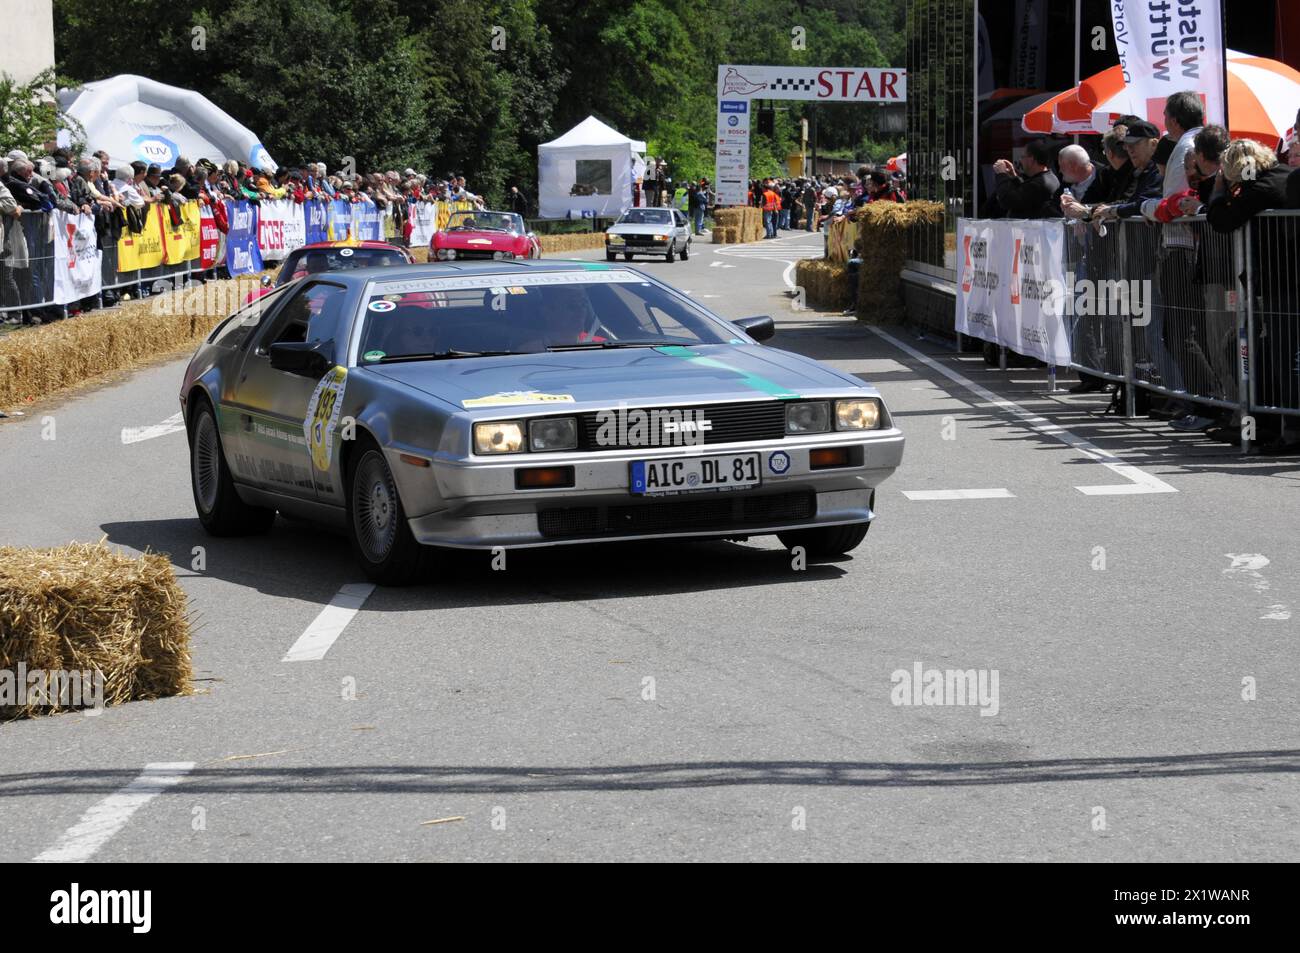 A silver DeLorean drives on a road during a classic car race, SOLITUDE REVIVAL 2011, Stuttgart, Baden-Wuerttemberg, Germany Stock Photo